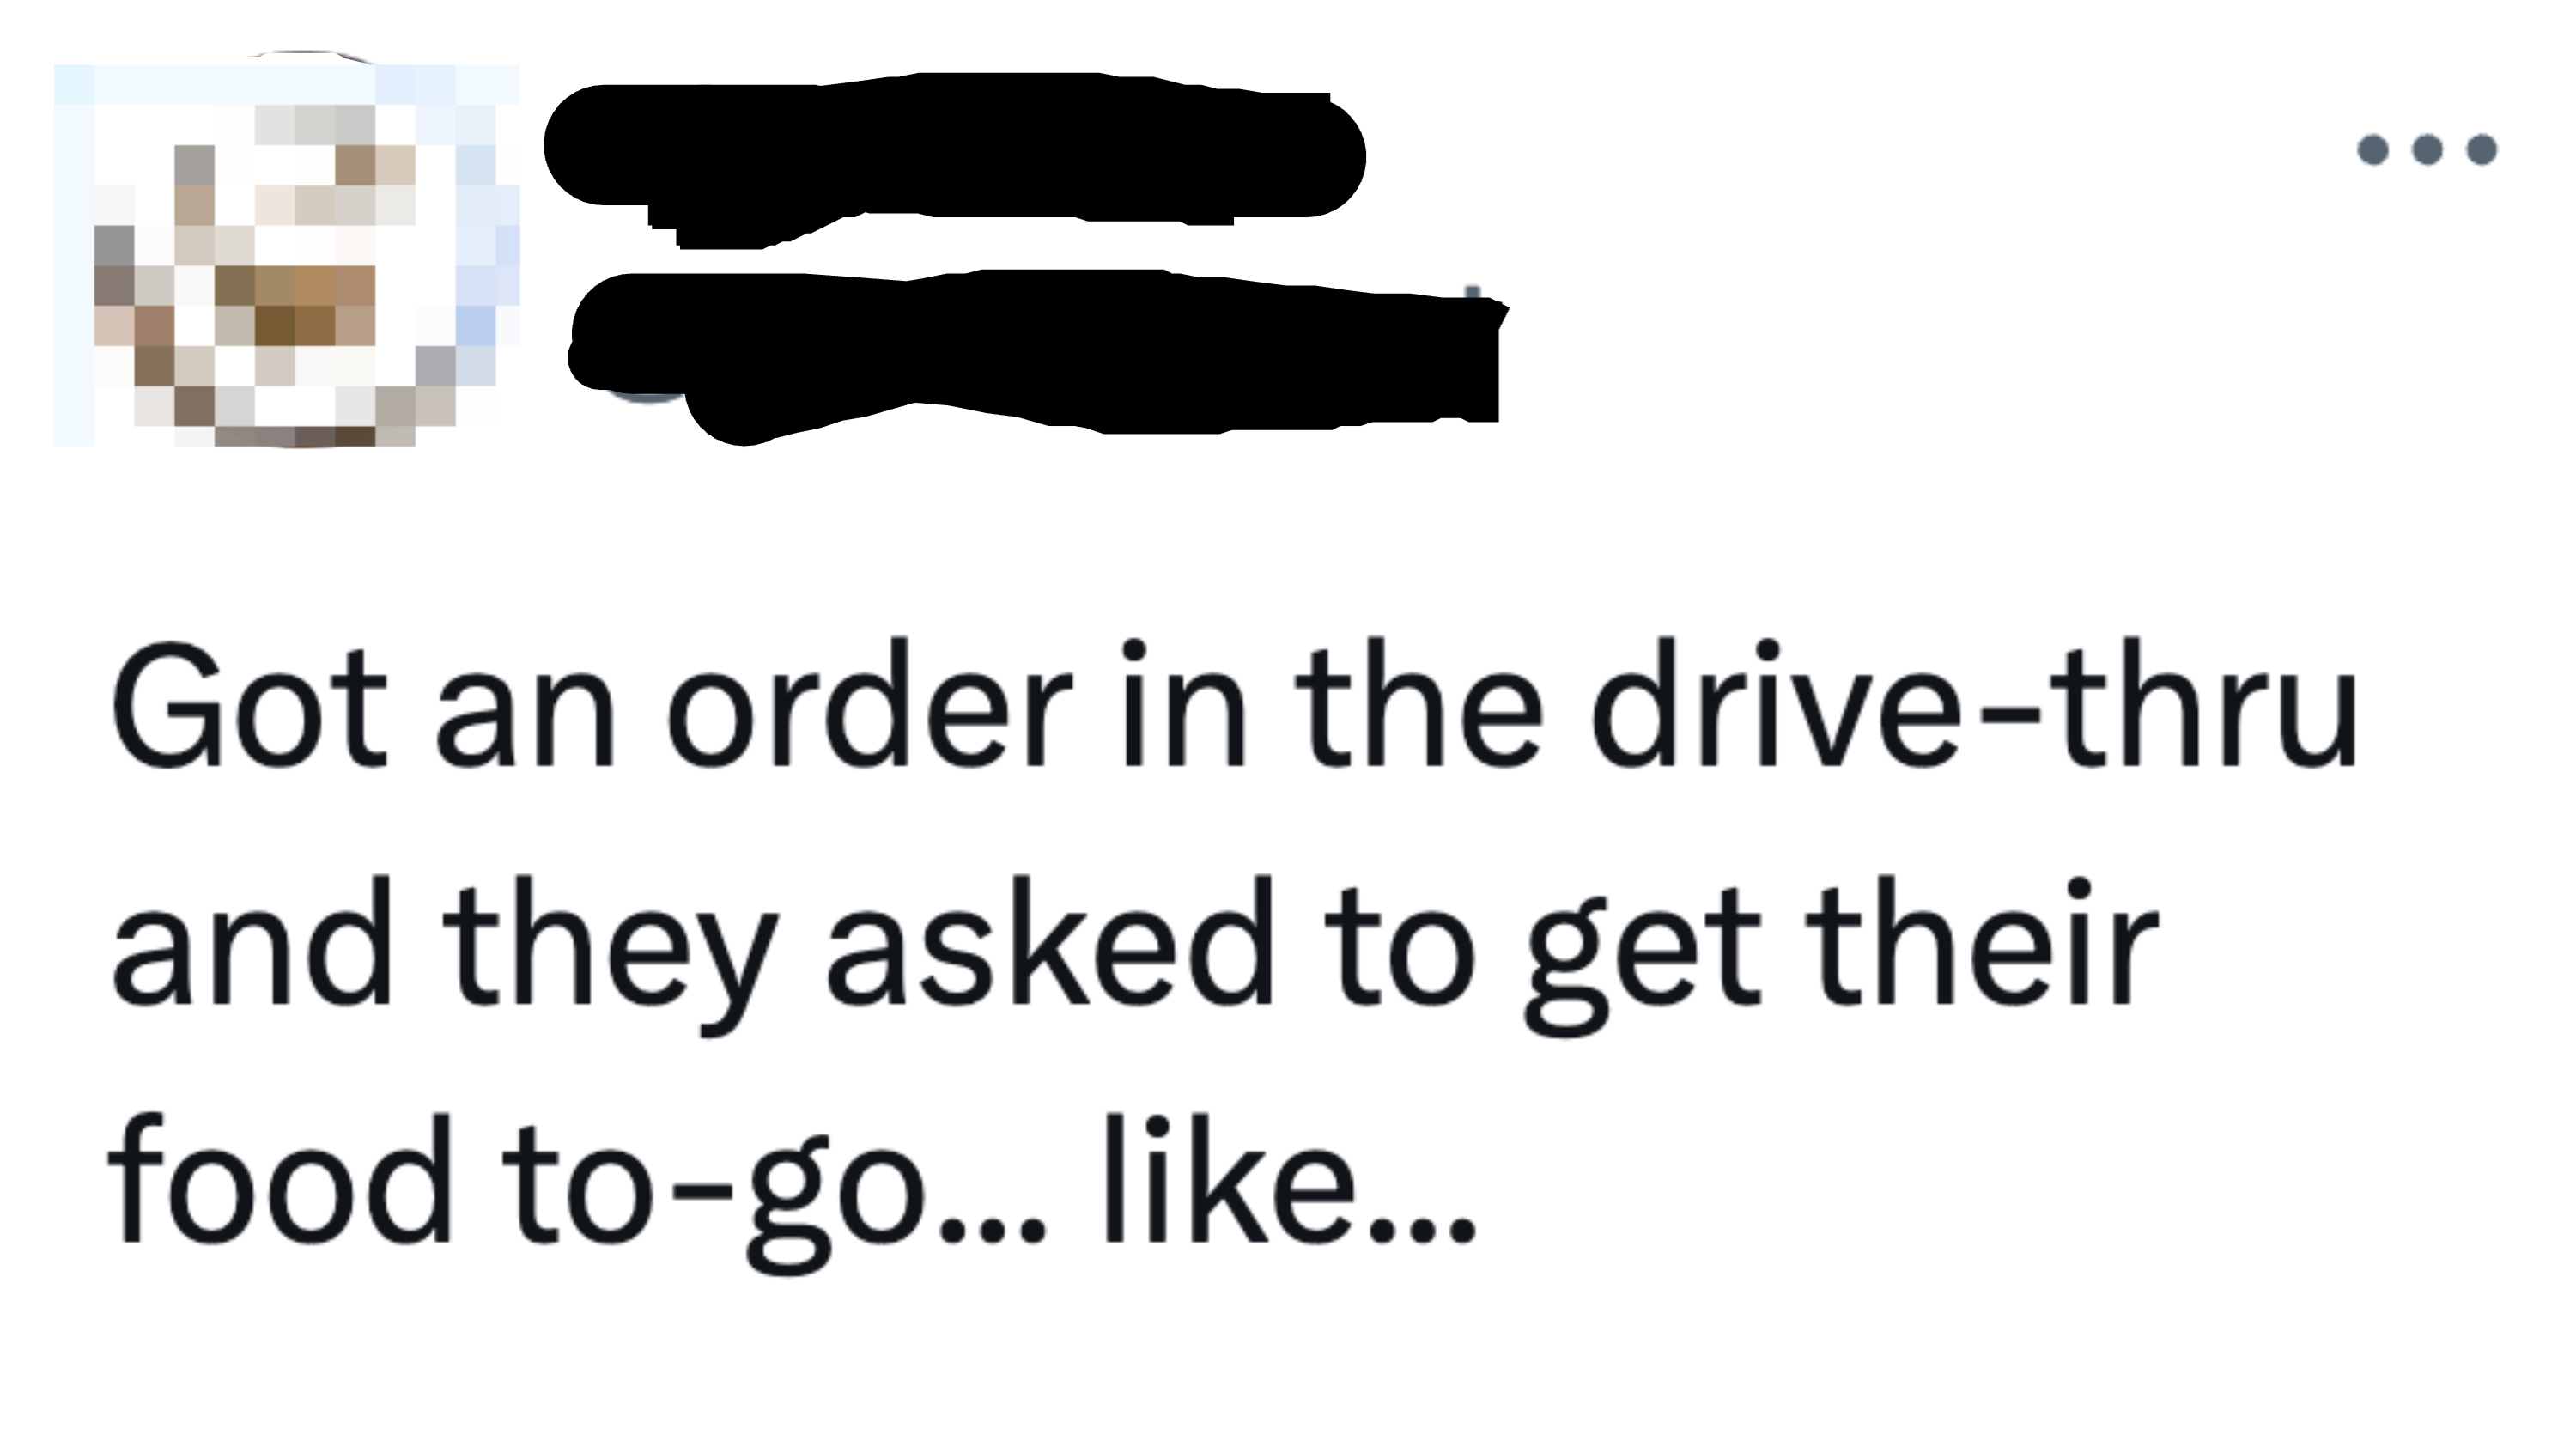 Twitter post reacting humorously to a typical drive-thru order request